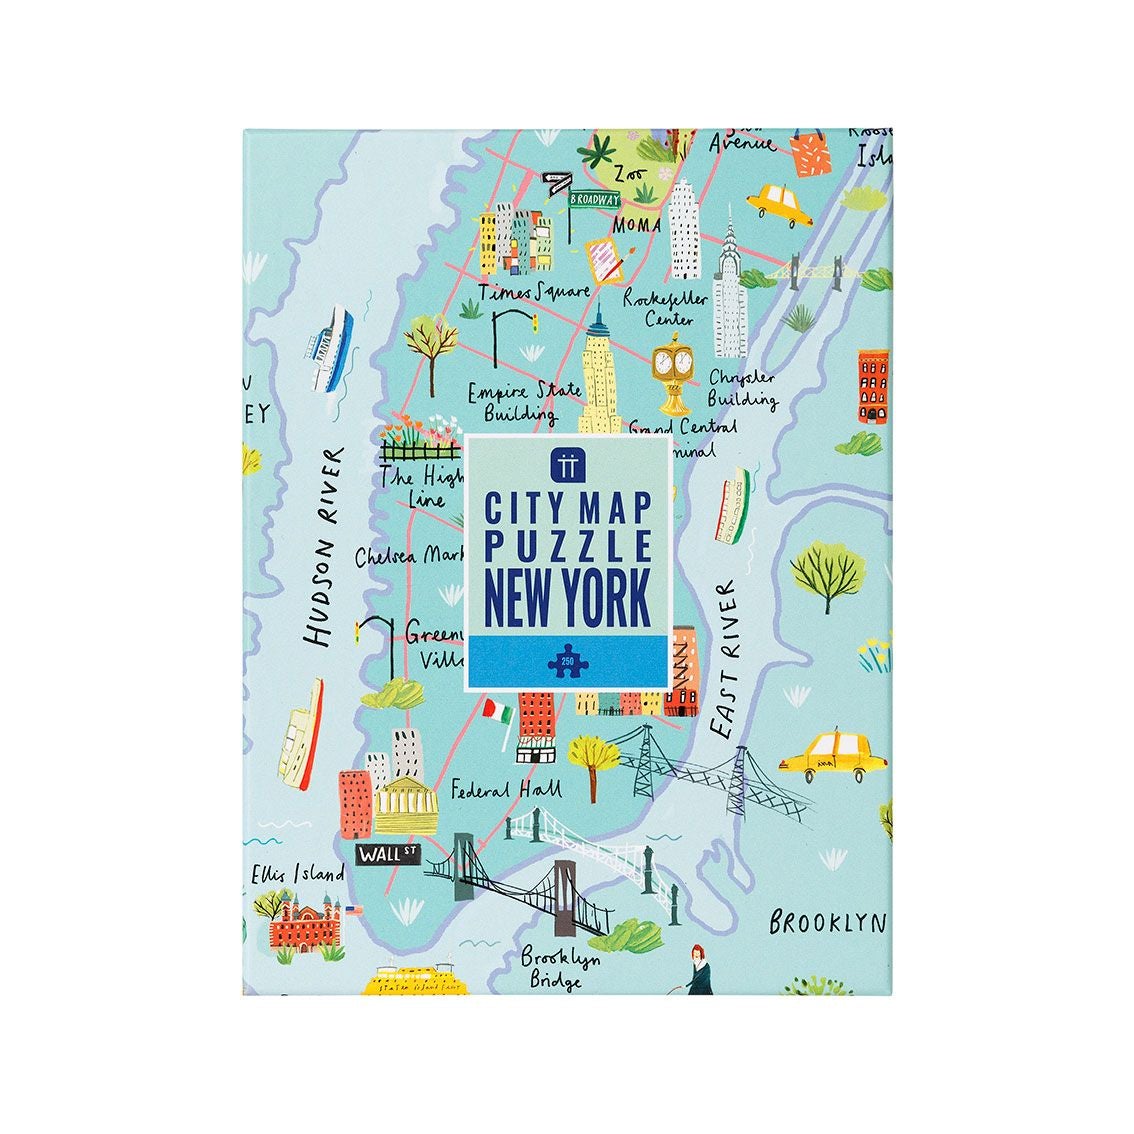 New York City Map | 250 Piece Jigsaw Puzzle Pick Me Up Puzzle Puzzledly.